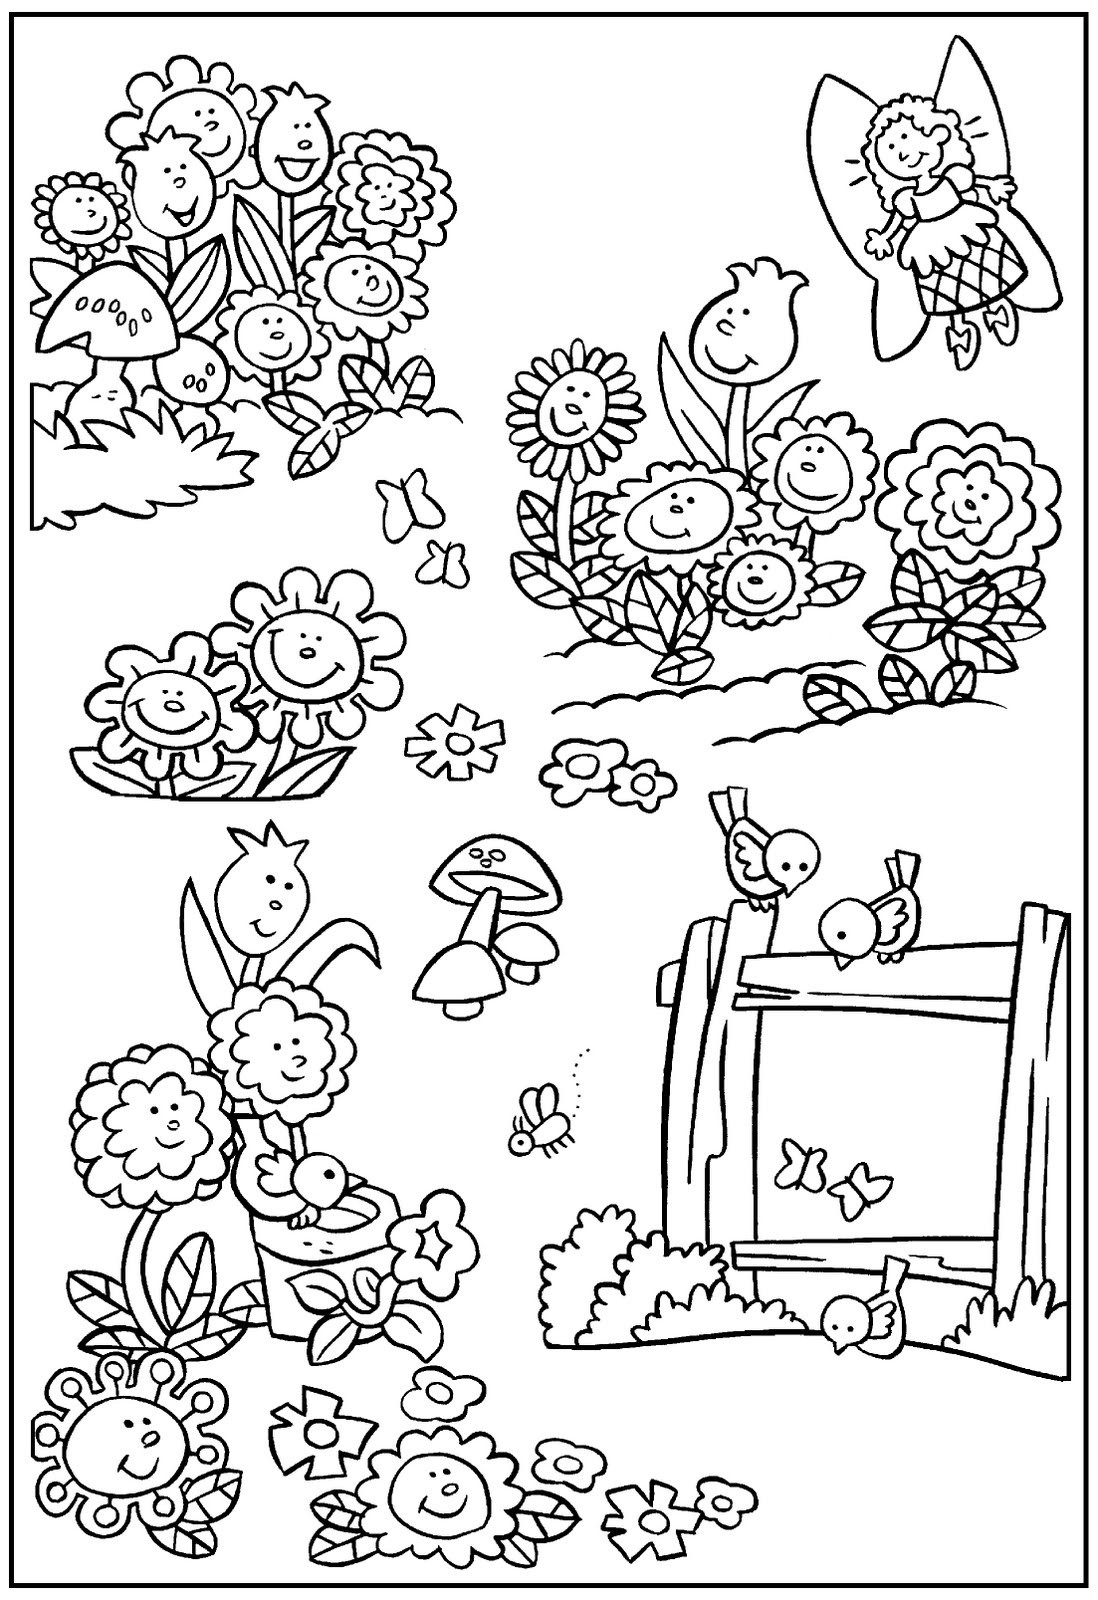 Printable Fairy With Flowers Garden coloring page for both aldults and kids.